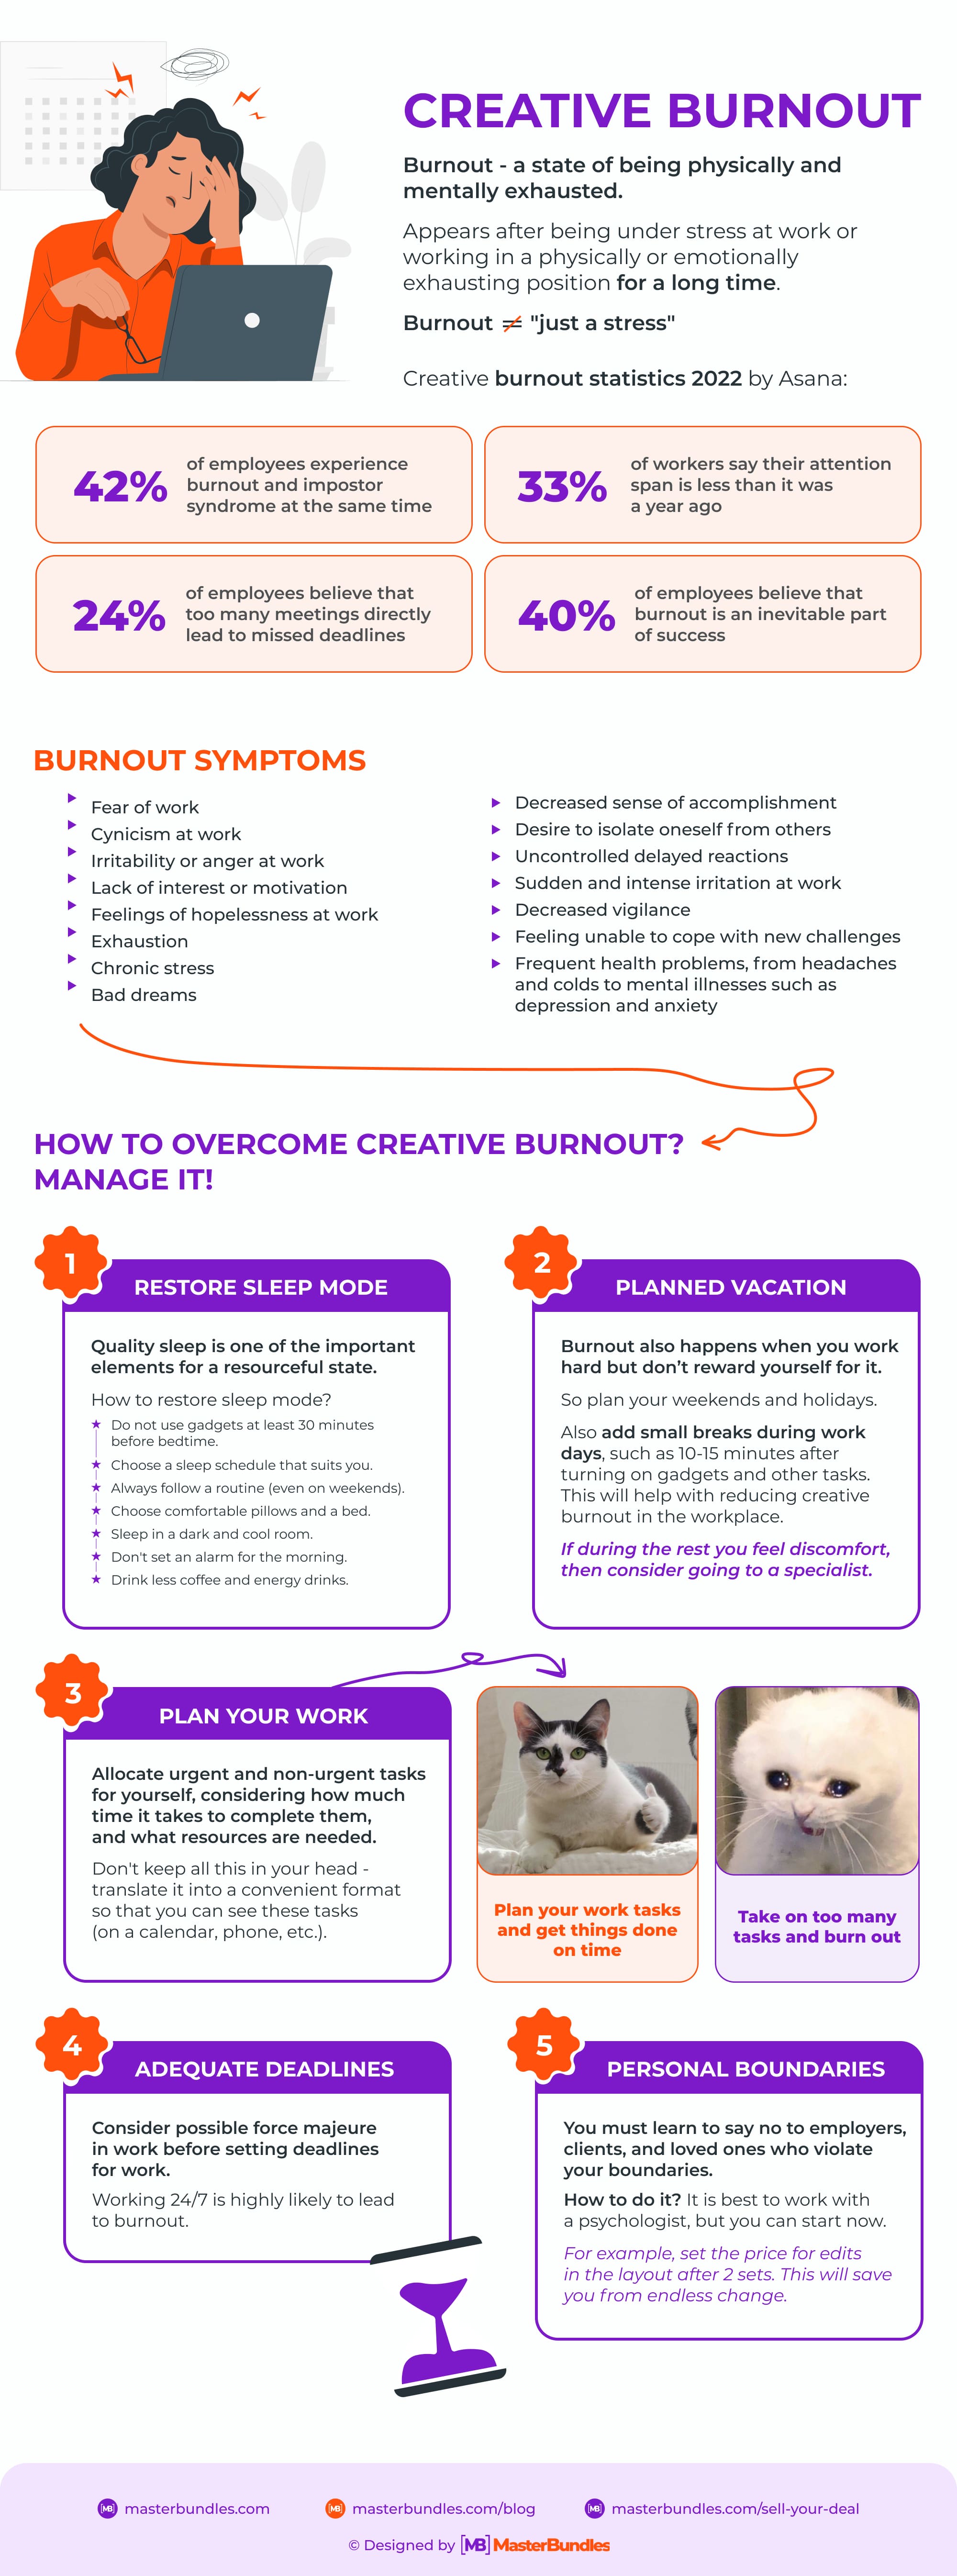 Creative Burnout in Infographic.